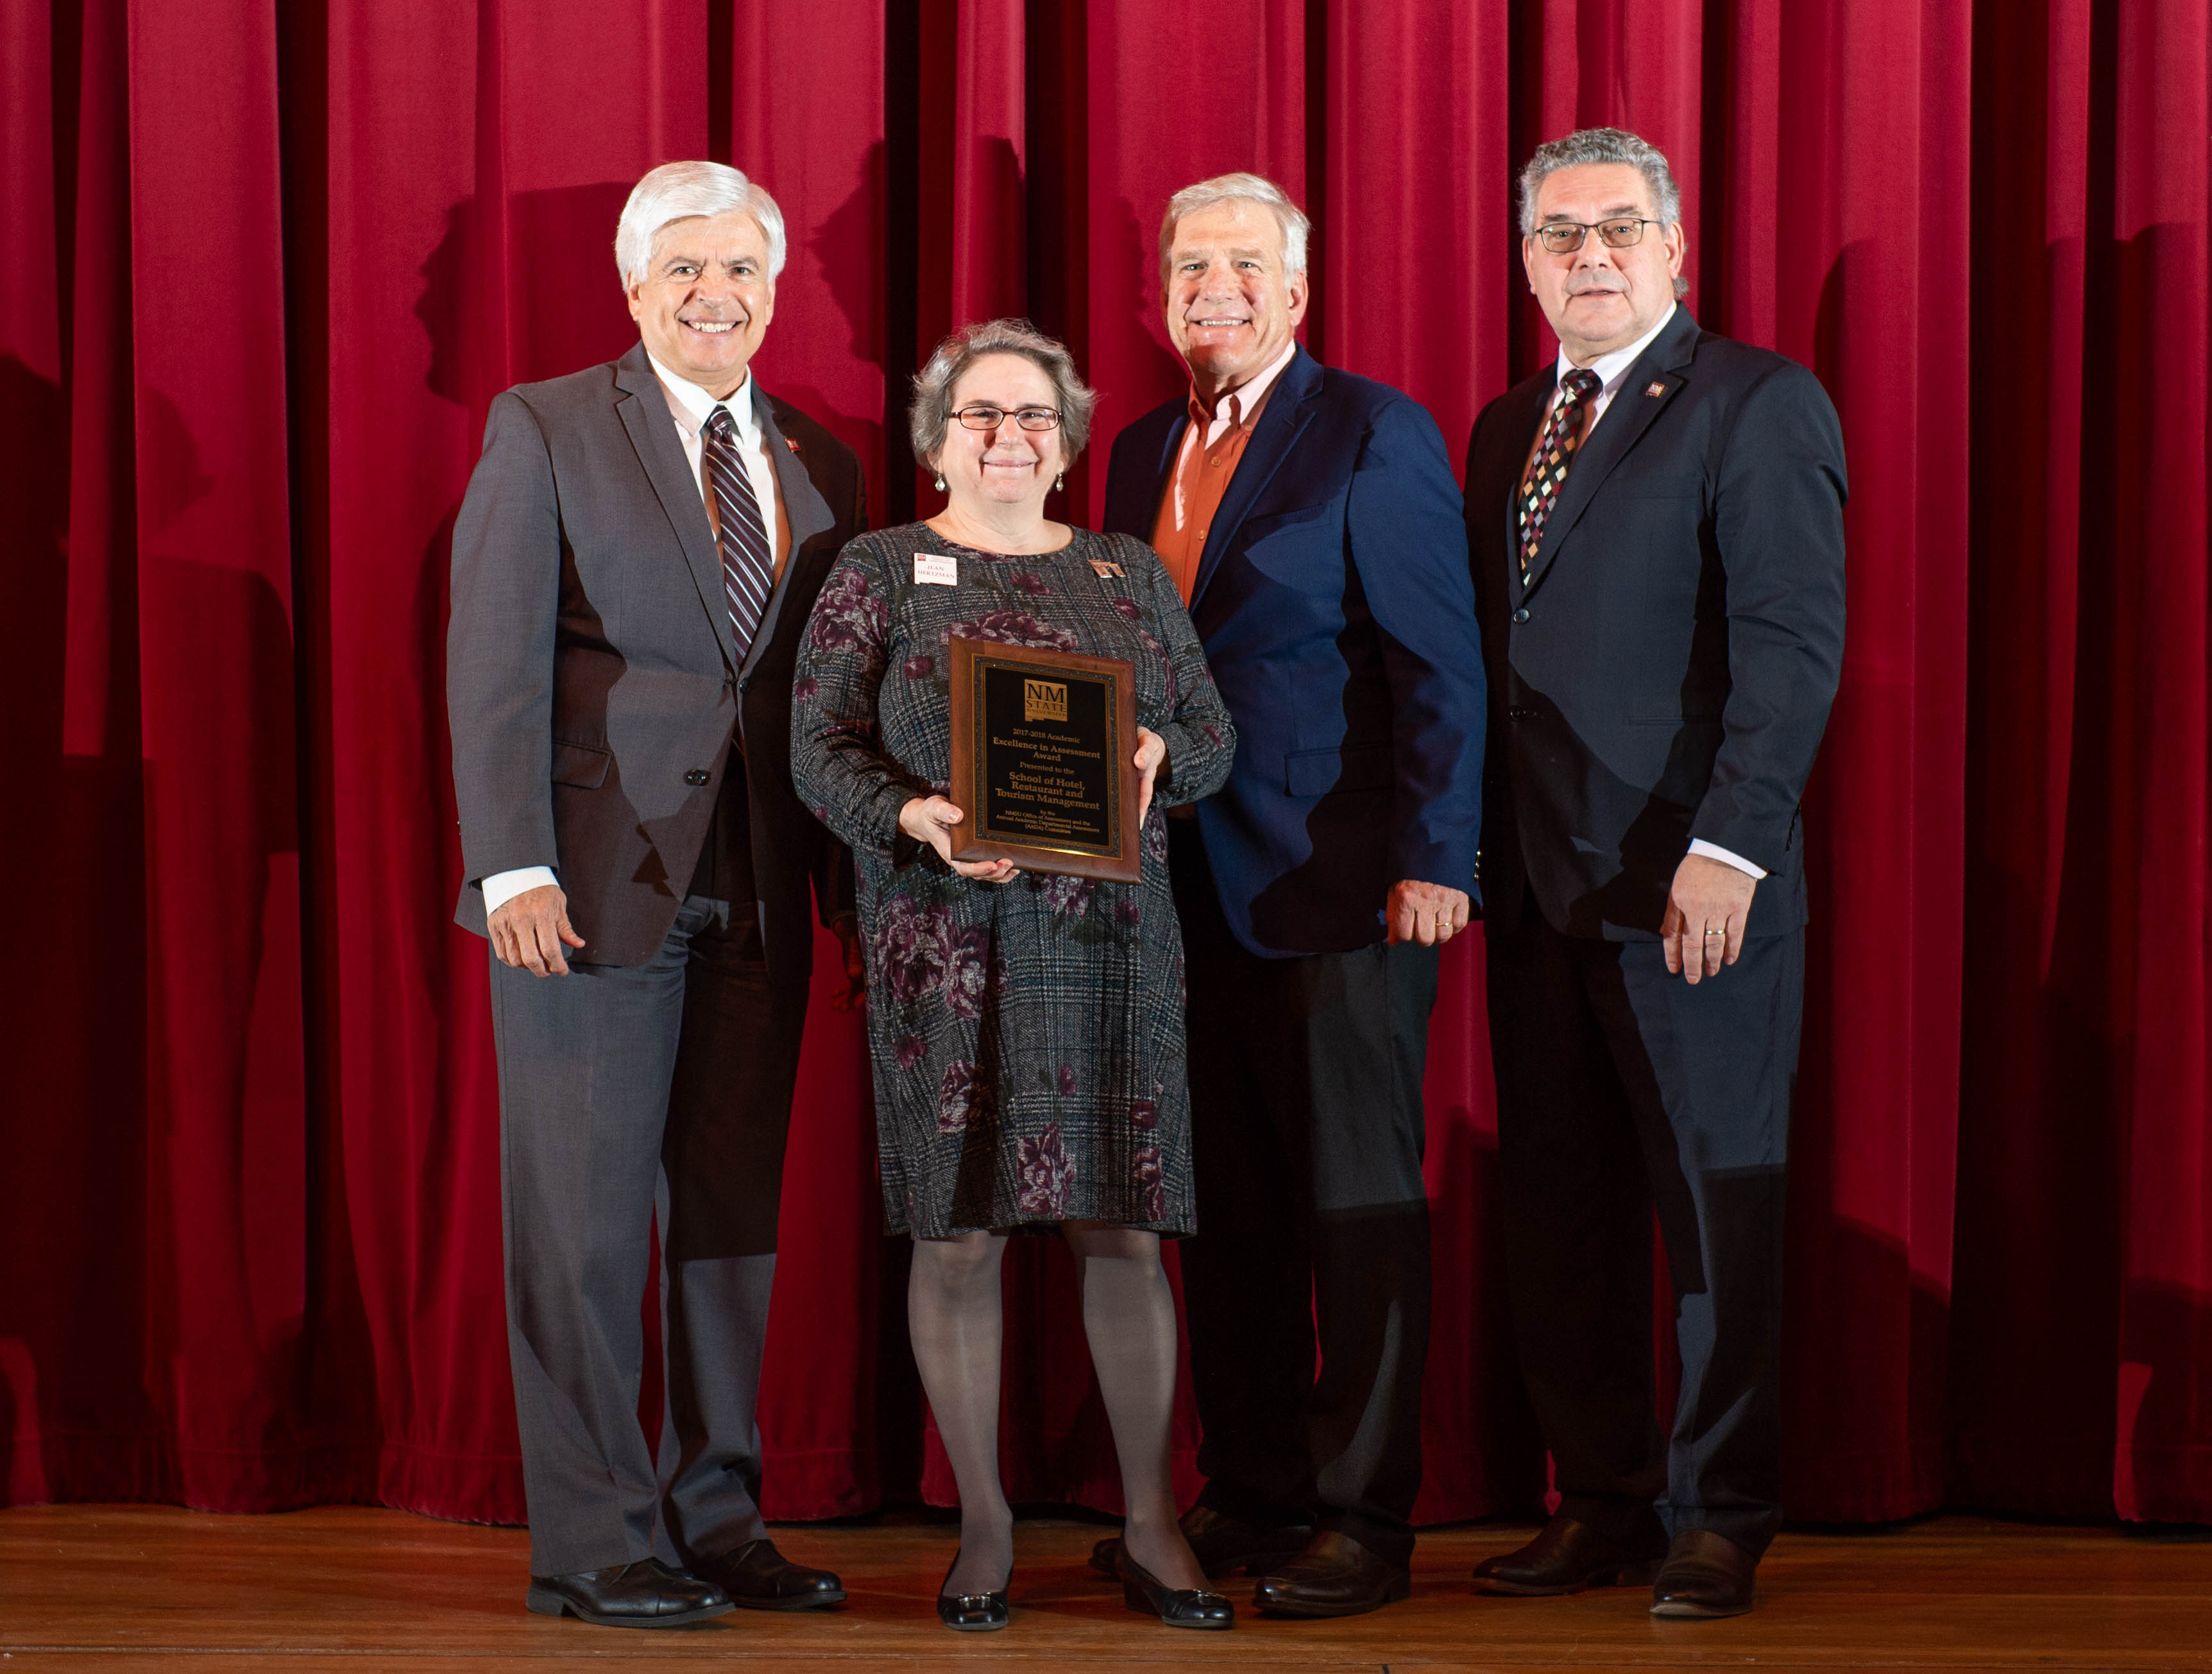 Dr. Jean Hurtsman and Dr. Keith Mandabach with the School of Hotel, Resturant and Tourism Management presented with The excellence in Assessment Award, standing with New Mexico State University's Chancellor Dan Arvizu and President John Floros, Tuesday January 15, 2018 at Atkinson Music Recital Hall.